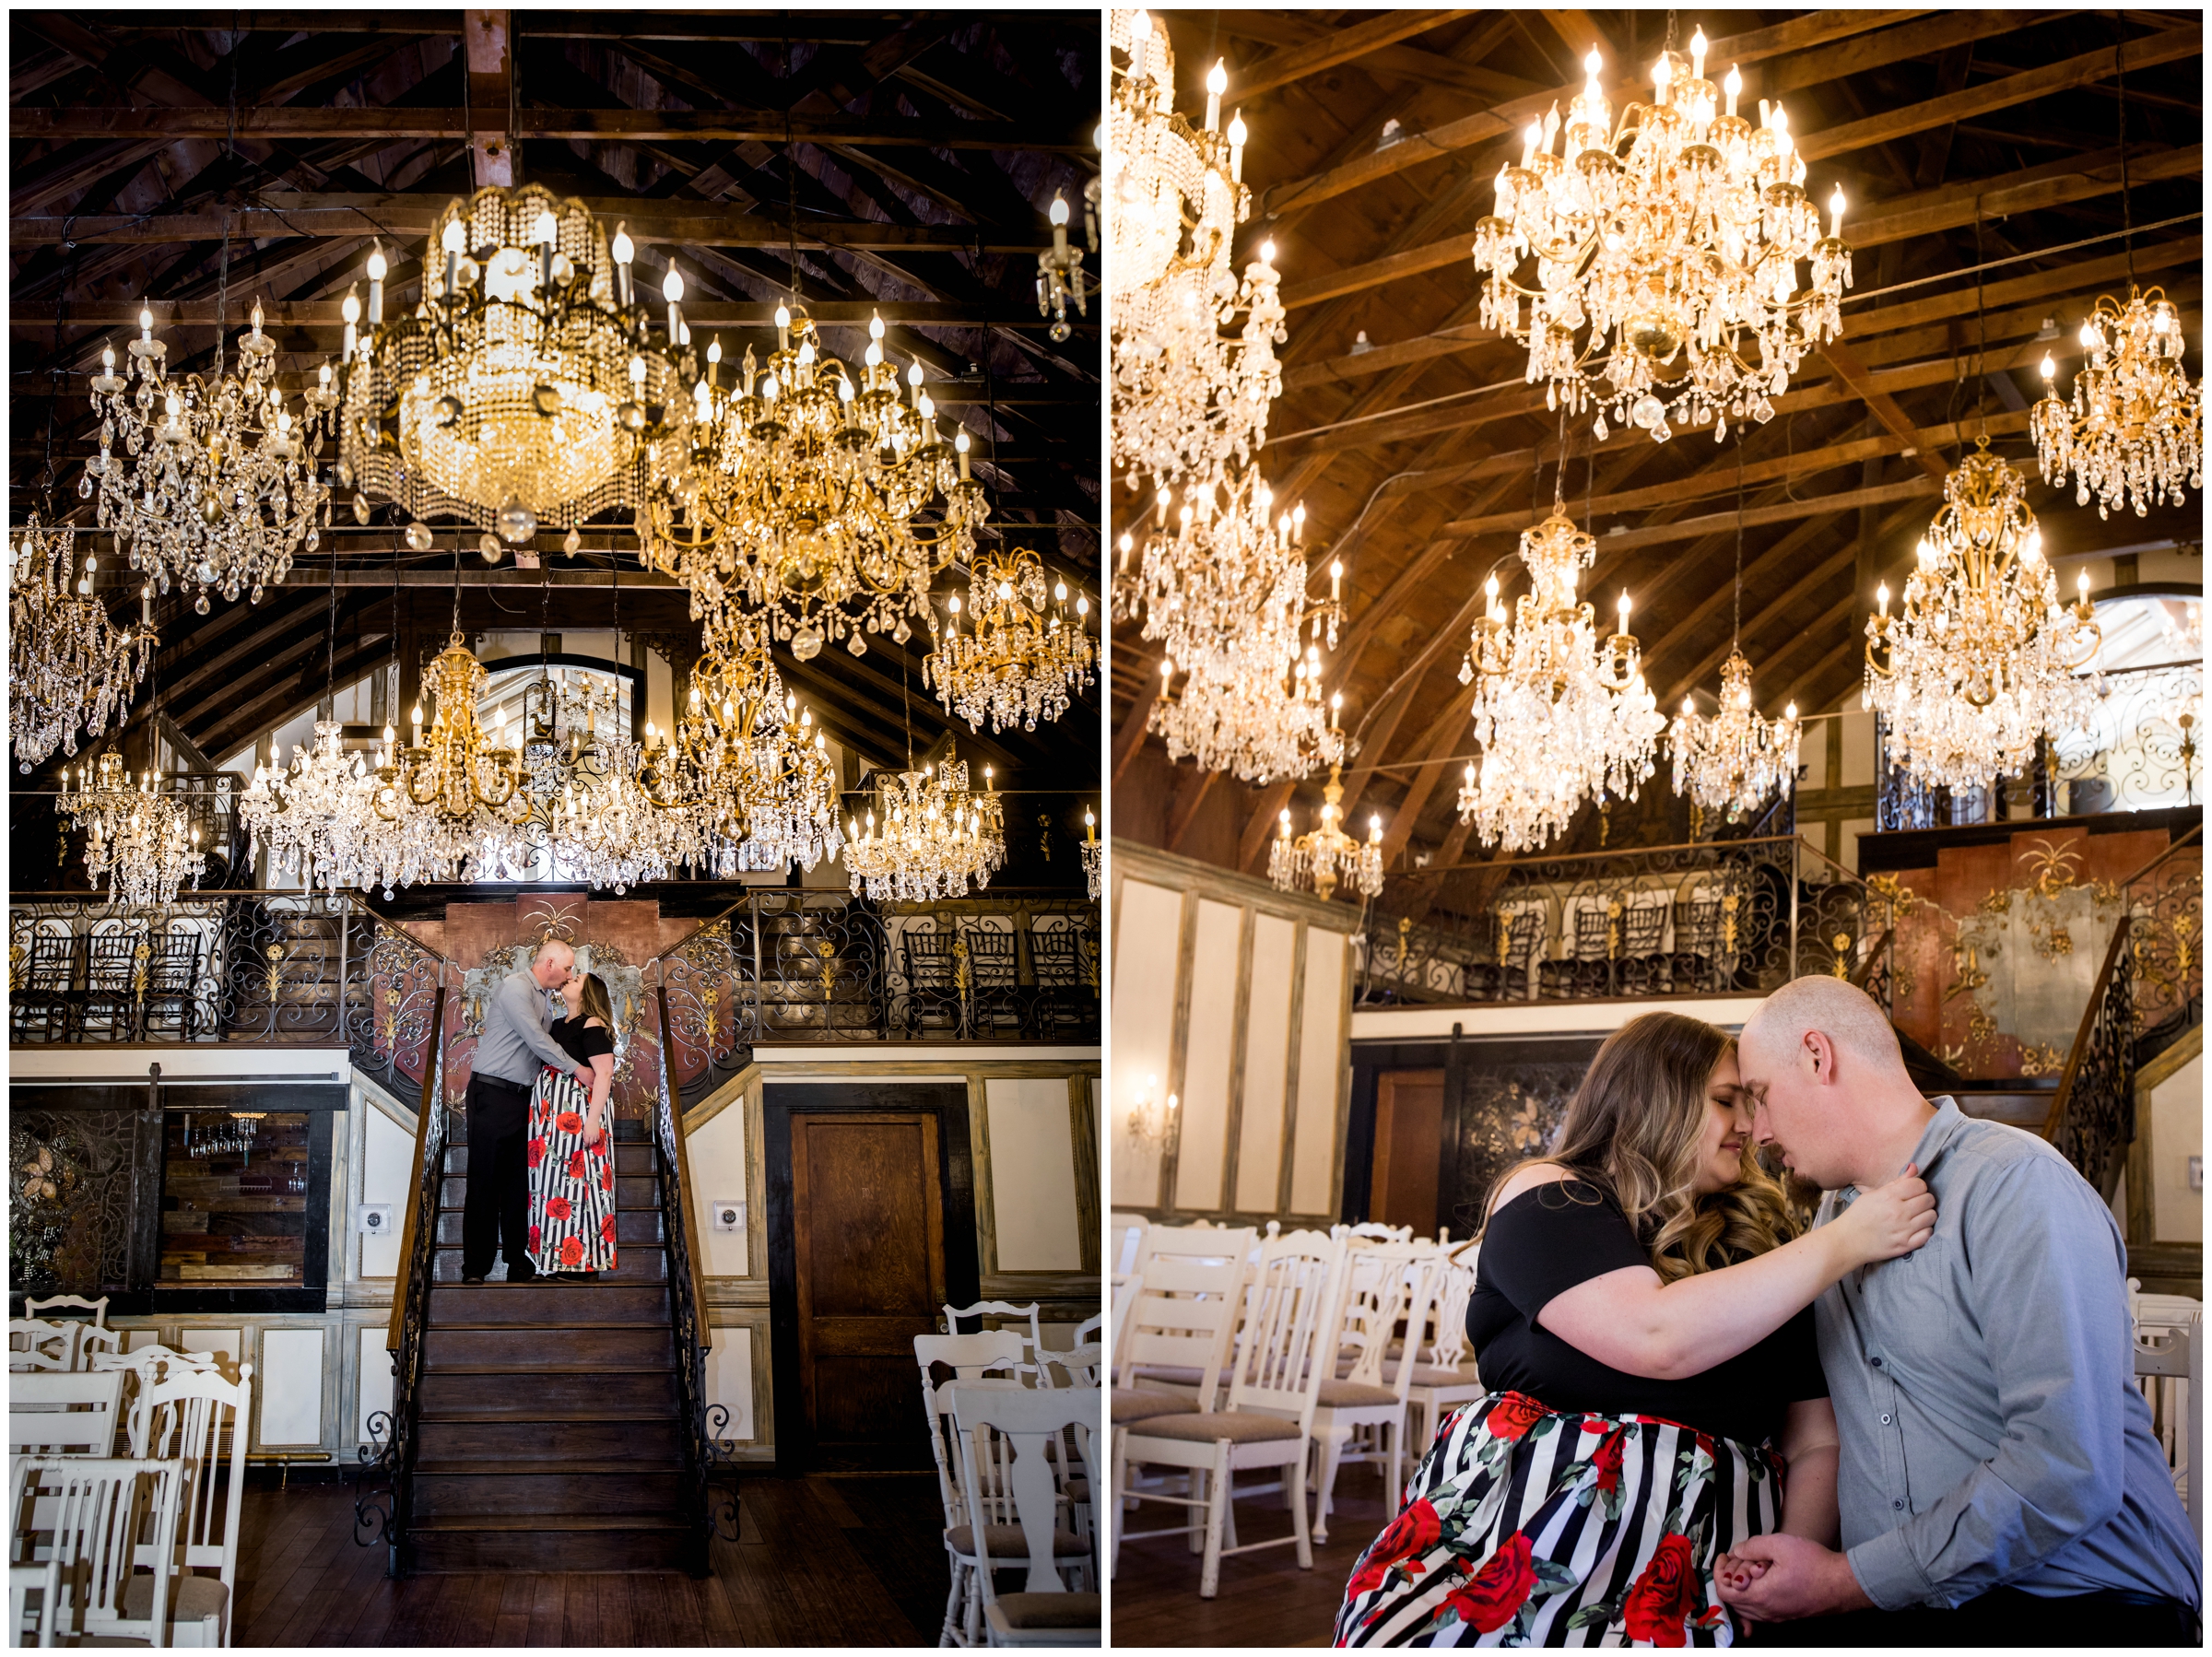 Lionsgate Event Center Chandelier Barn engagement pictures by Colorado wedding photographer Plum pretty Photography 